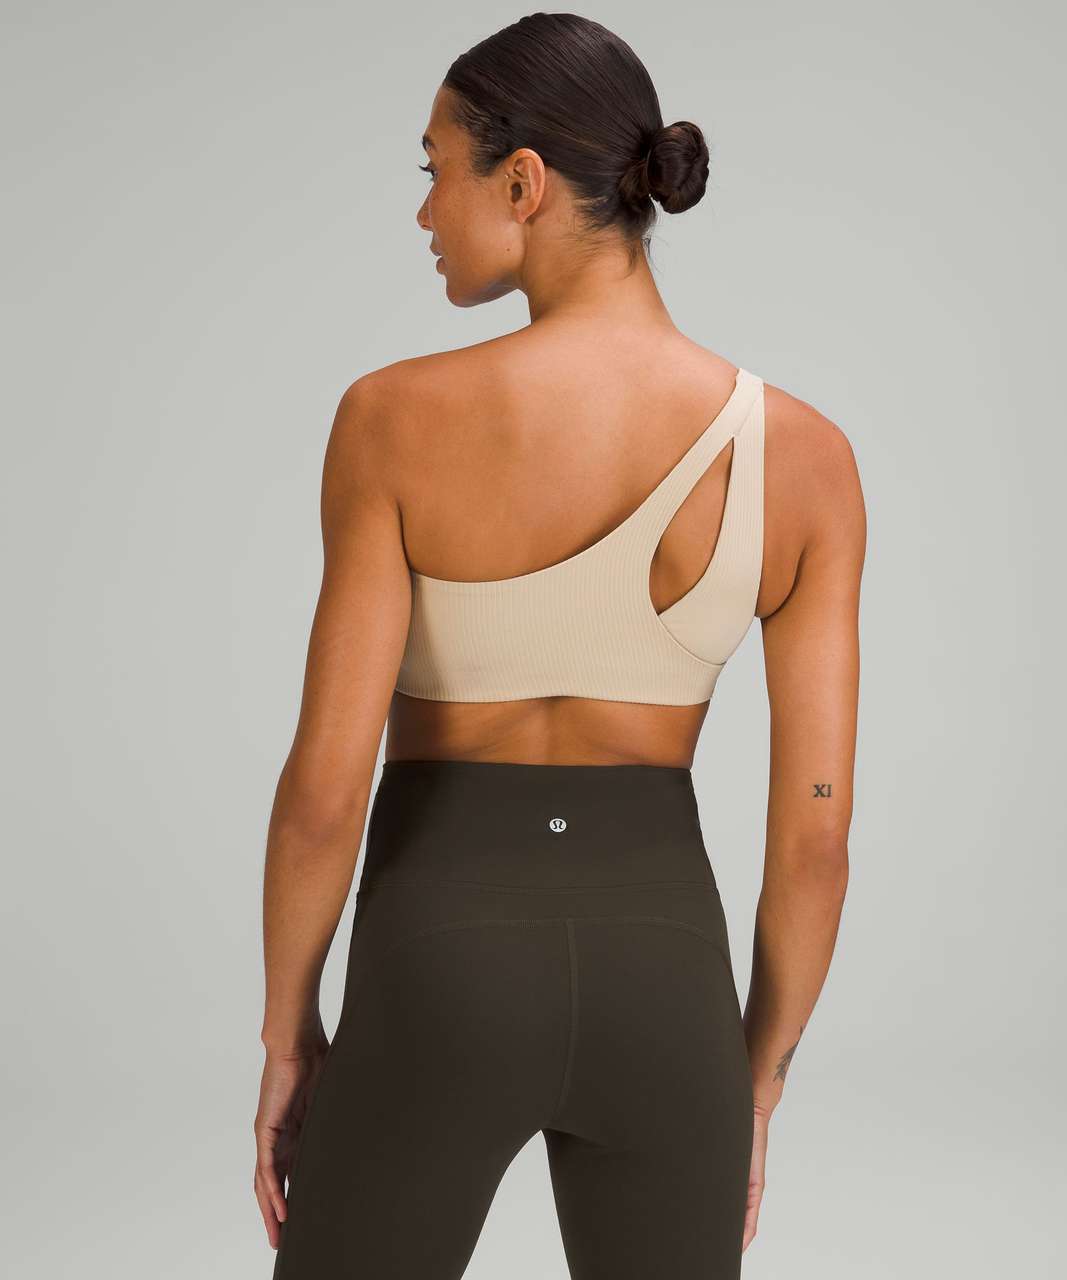 Lululemon Ribbed Nulu Asymmetrical Yoga Bra *Light Support, A/B Cup - Trench